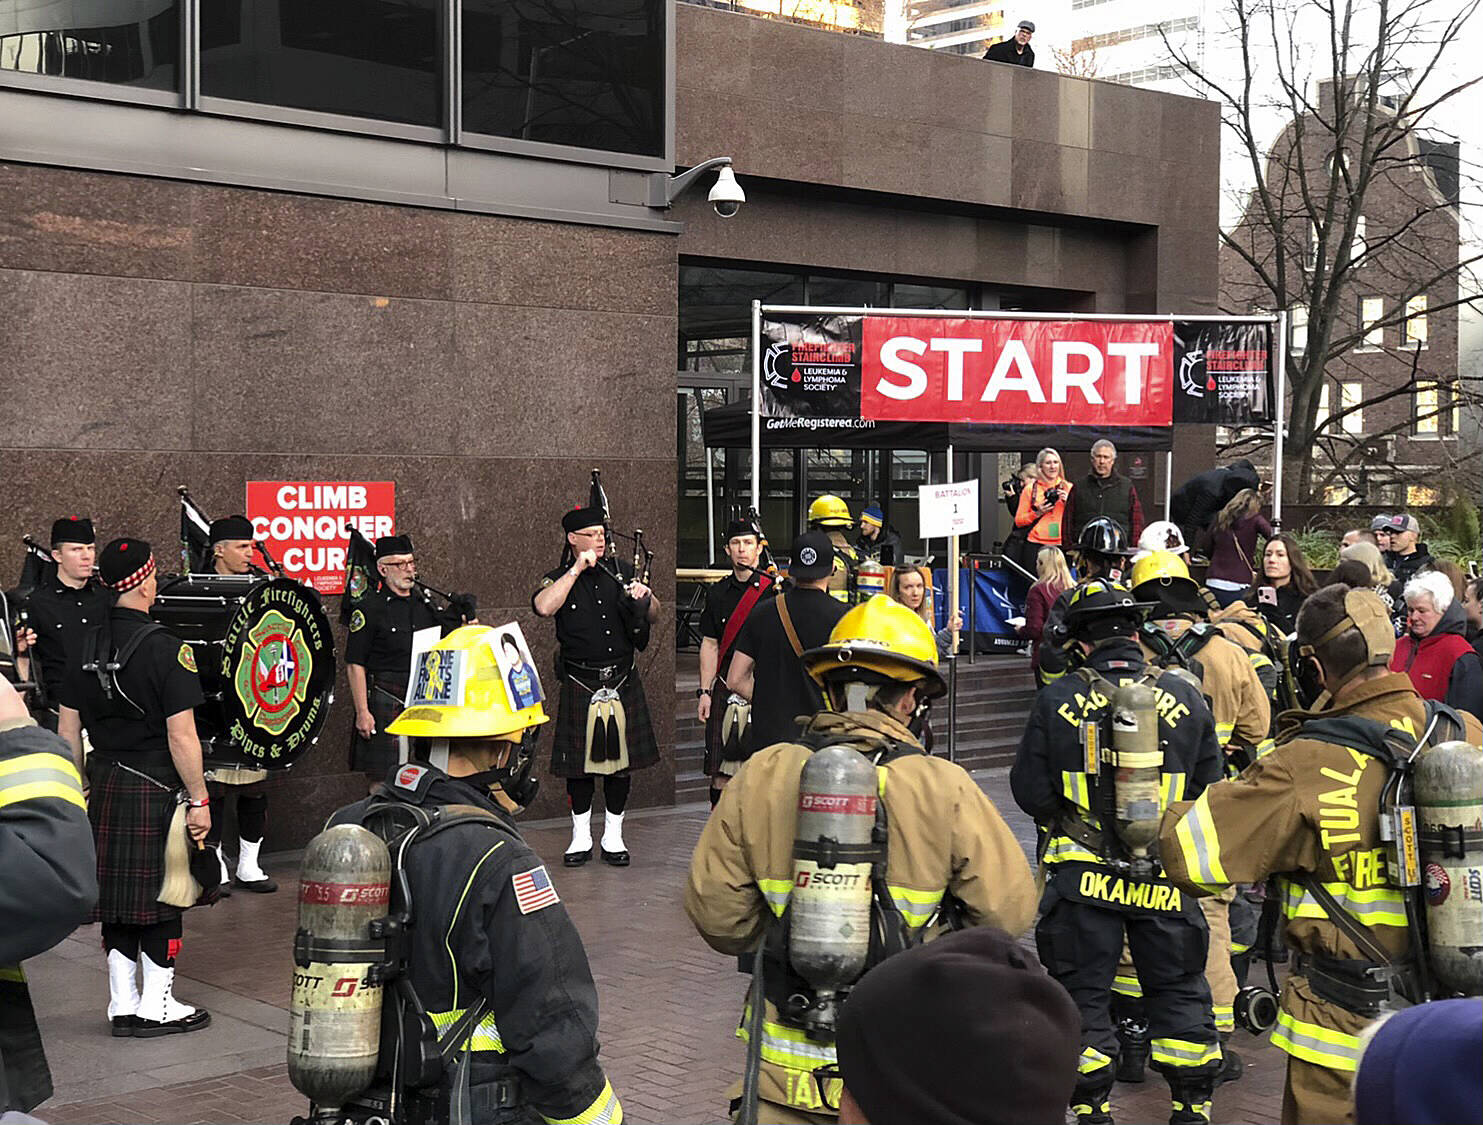 Entrance to the LLS Firefighter Stairclimb in Seattle. Photo courtesy of James Hampson